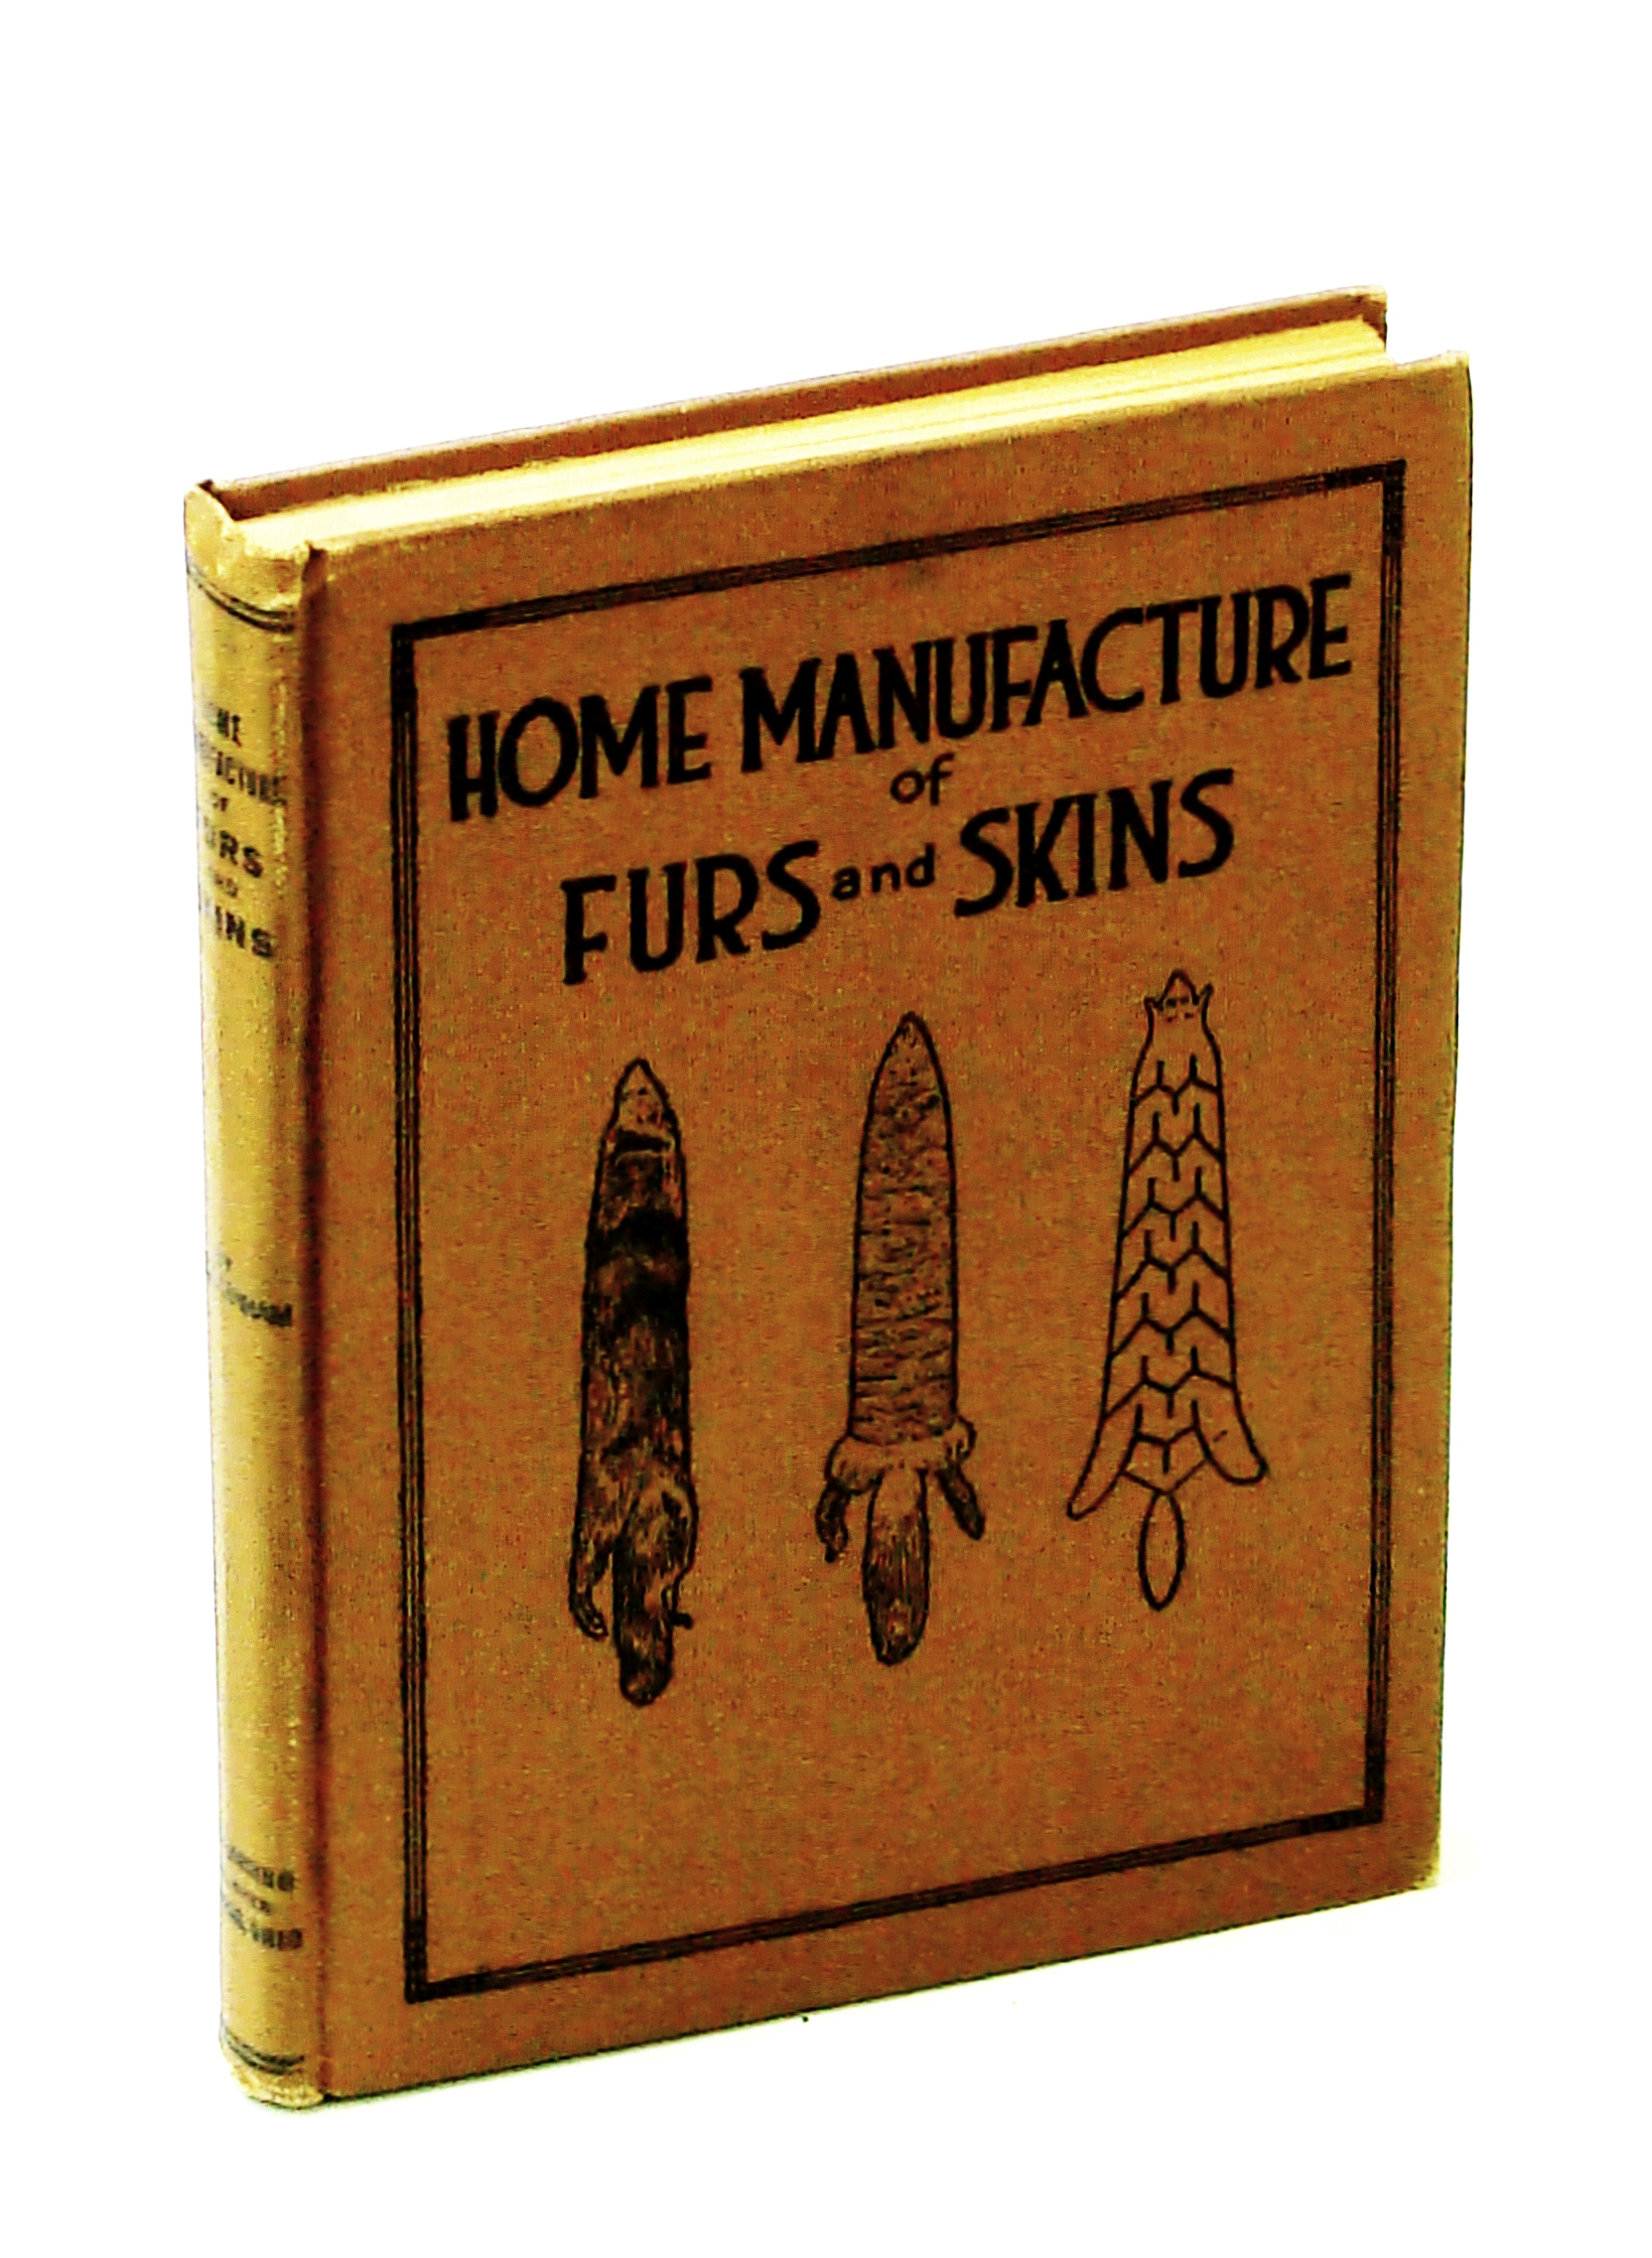 FIRST EDITION - Home